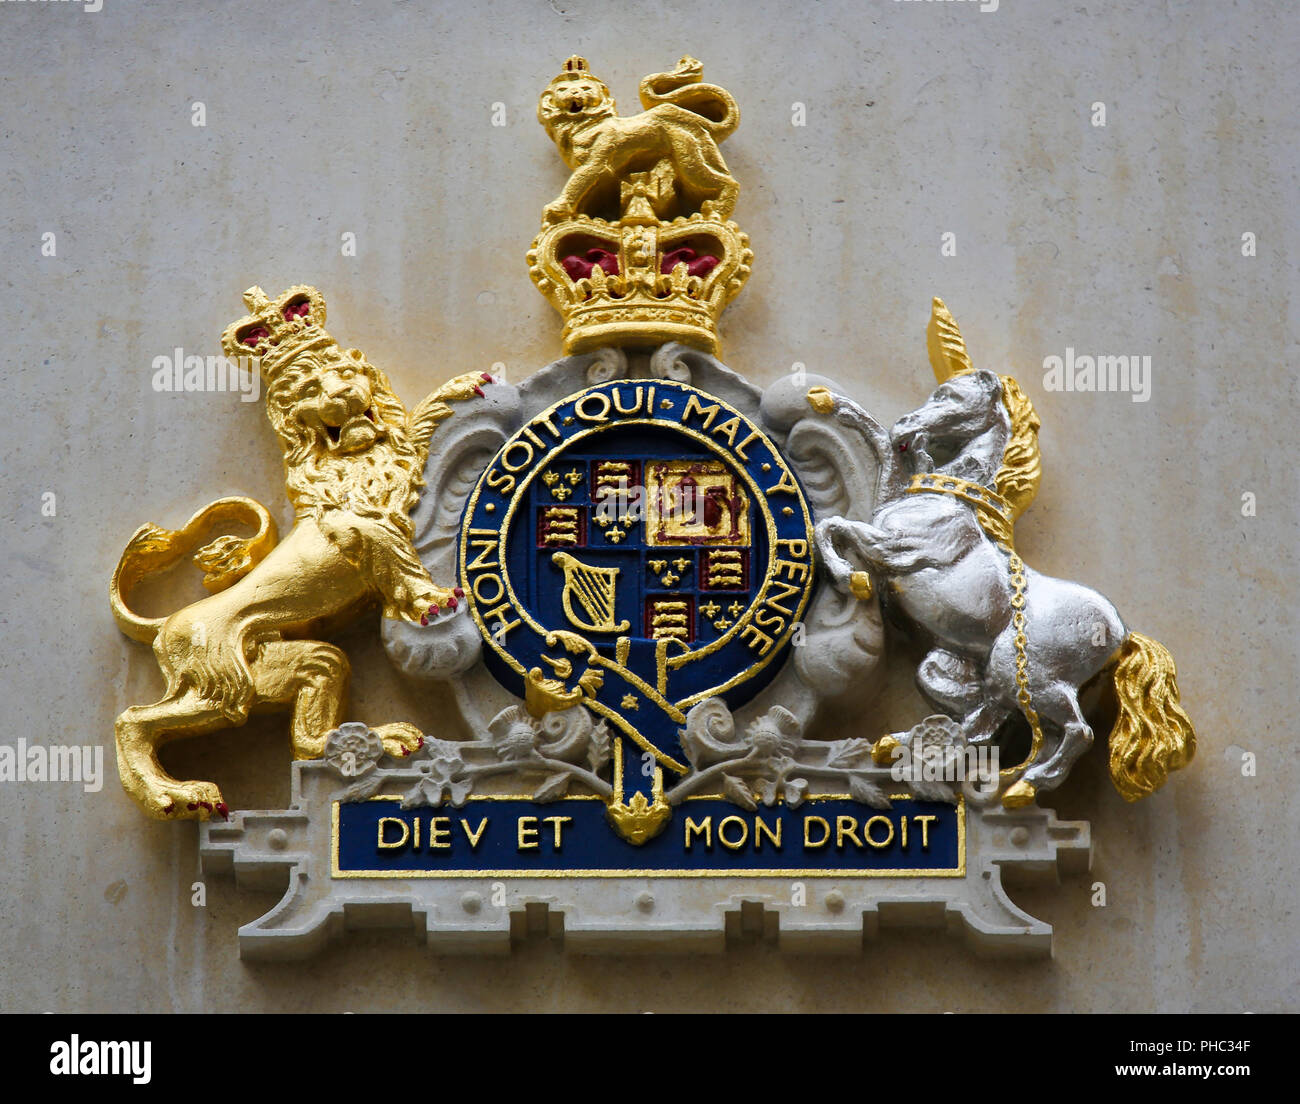 Royal Shield Of The Monarch Of The United Kingdom With The Motto Dieu Et Mon Droit Meaning God And My Right Stock Photo Alamy